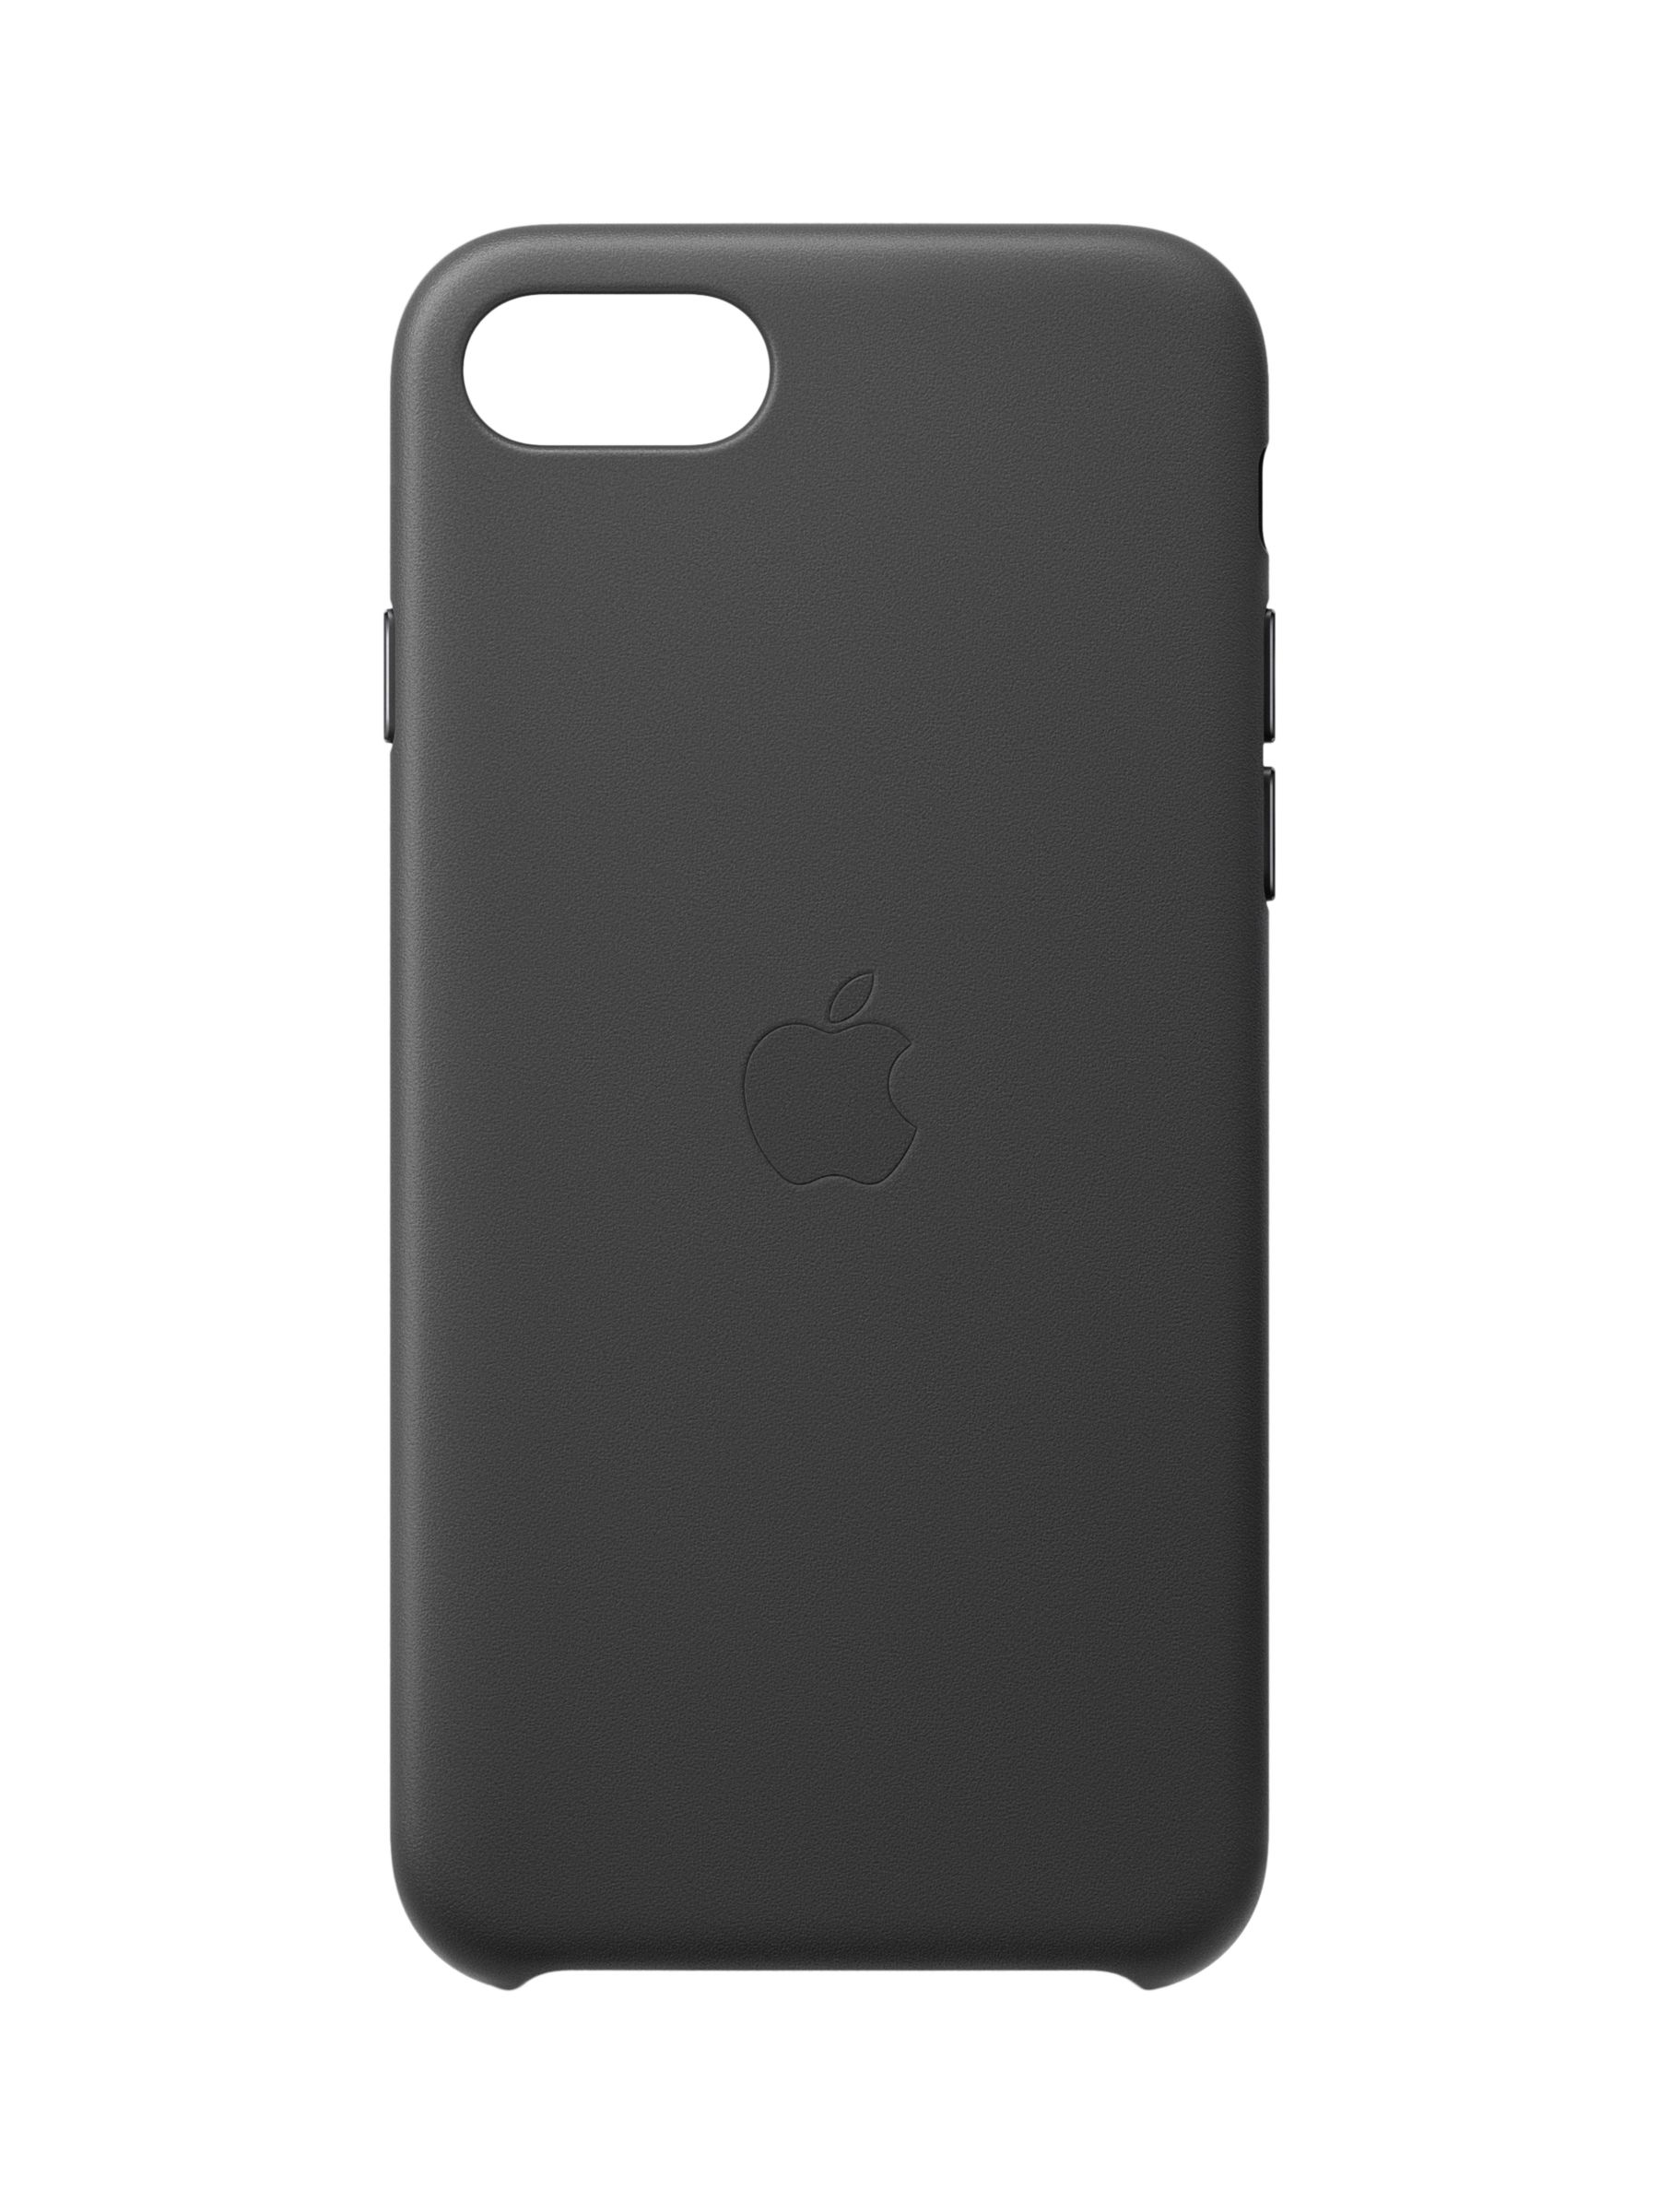 Apple Leather Case for iPhone 7 / 8 / SE (2020), Black